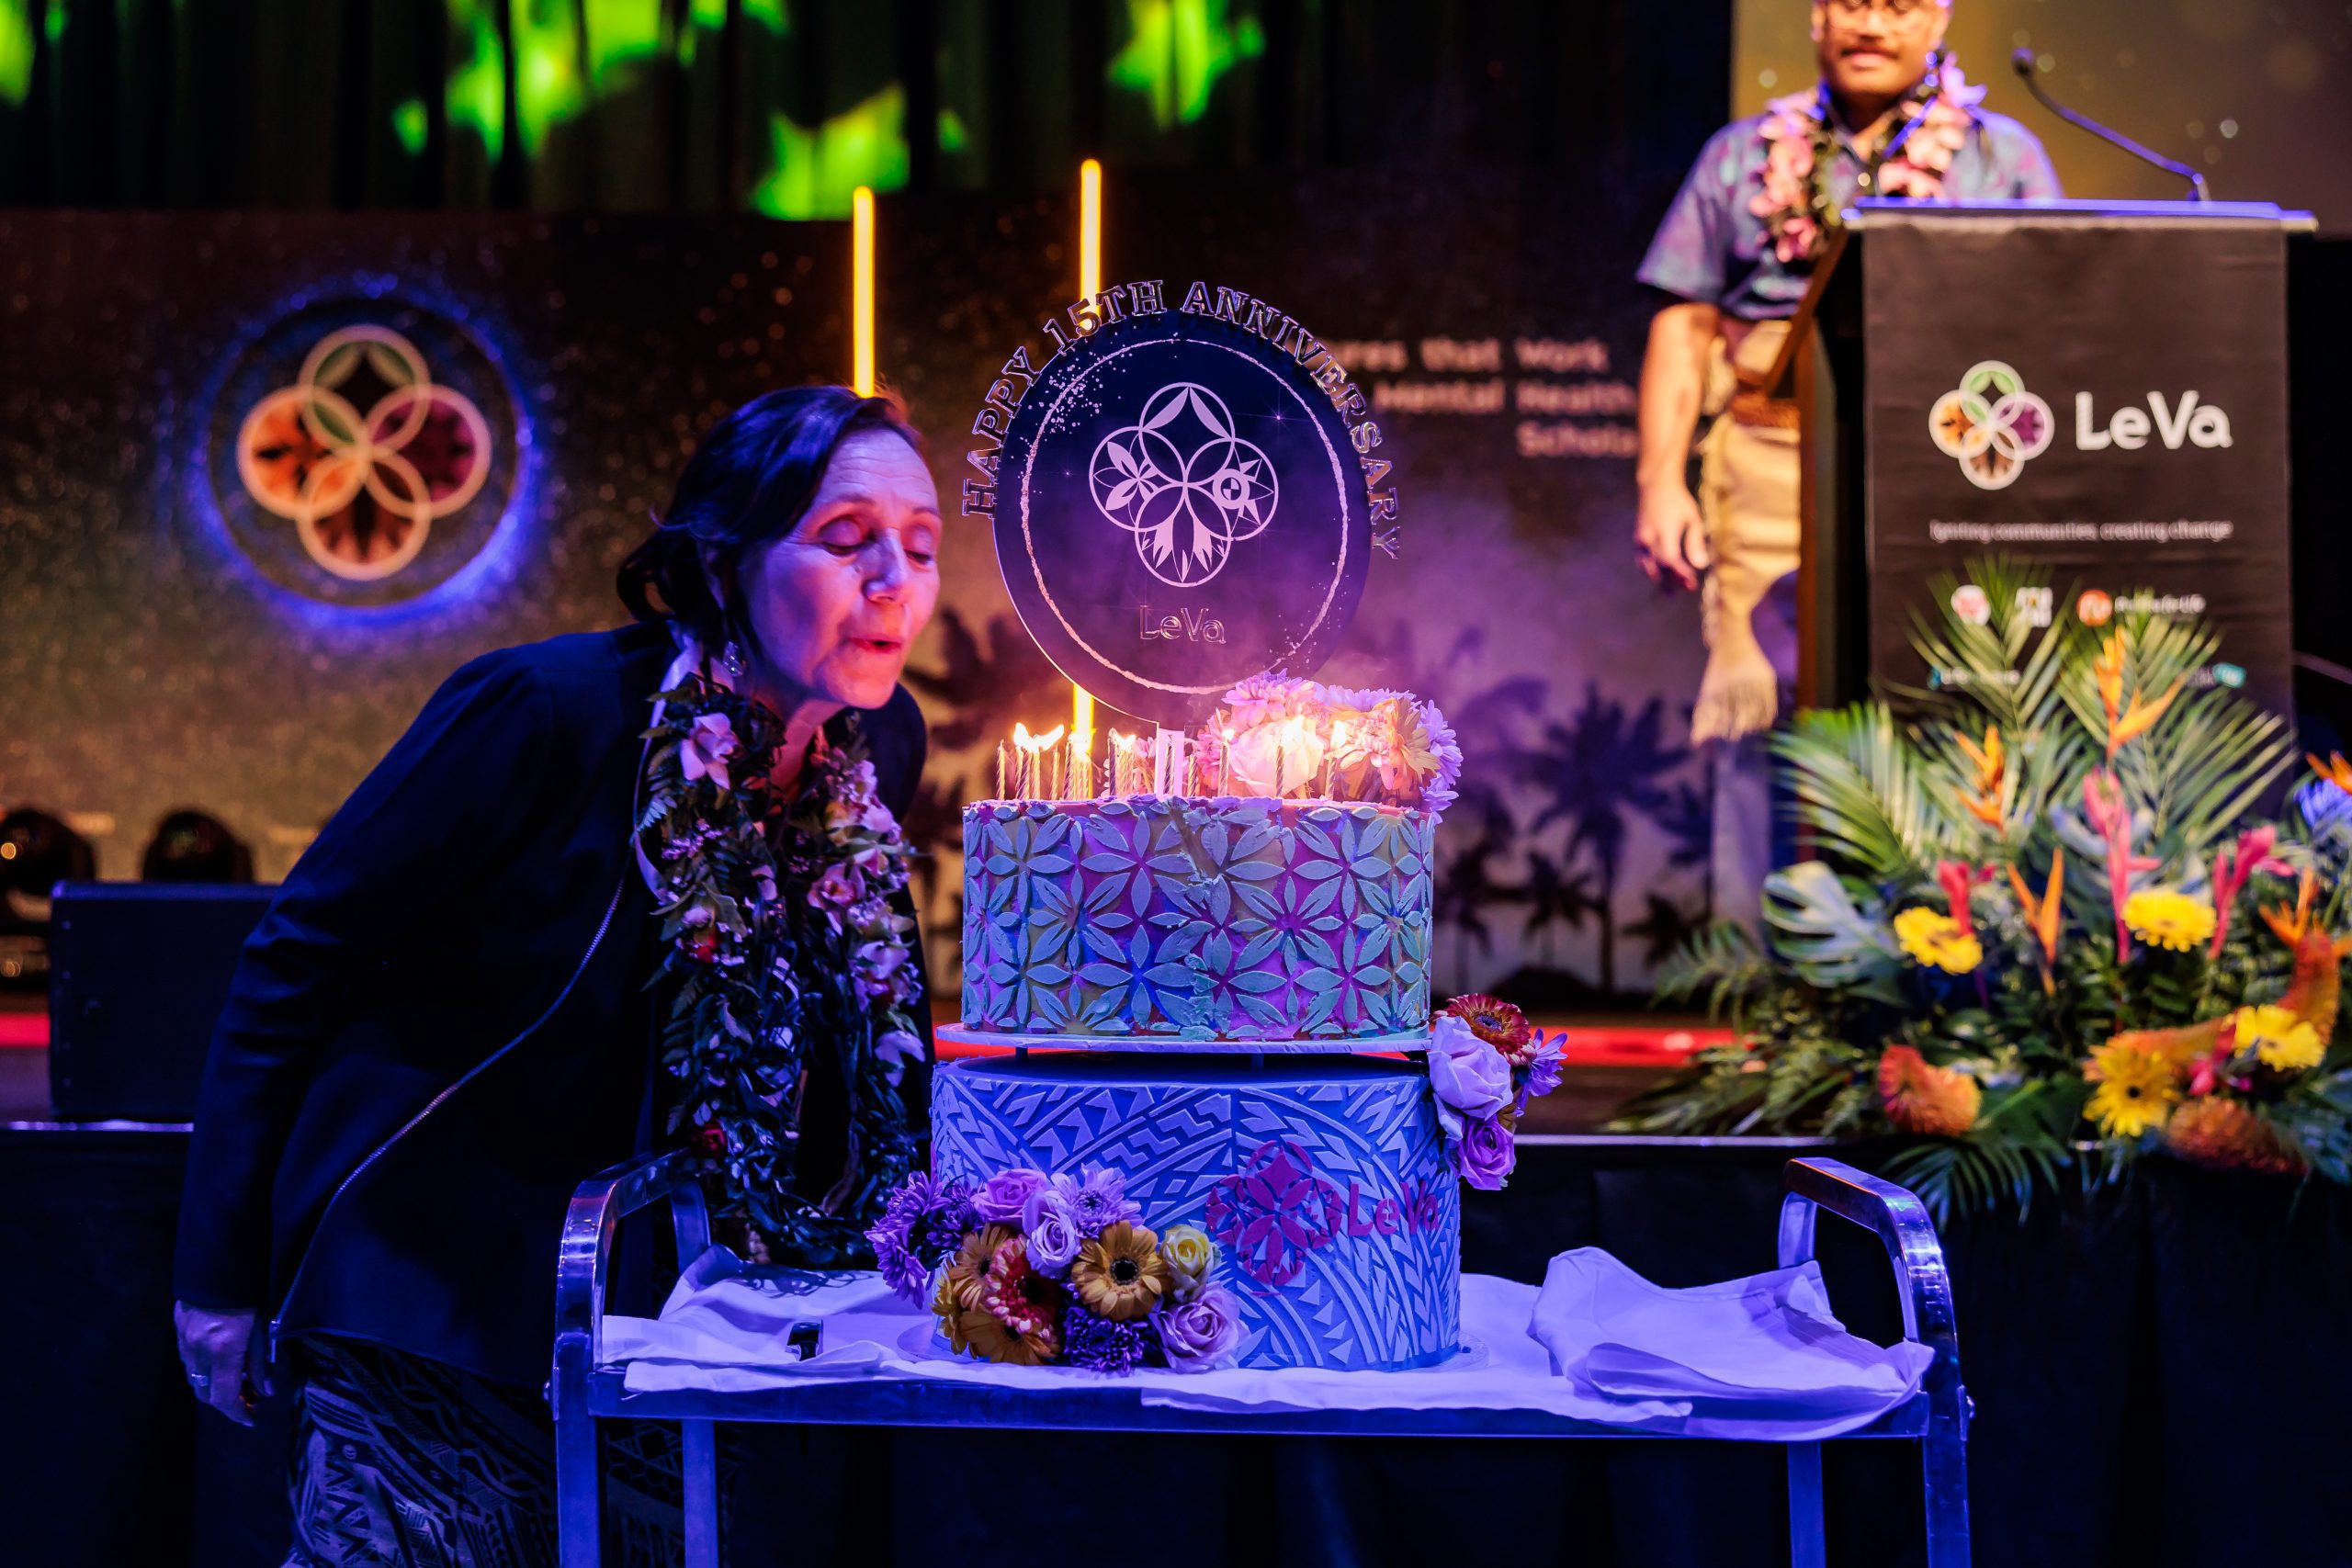 Denise Kingi-‘Ulu’ave, blowing out birthday candles for Le Va